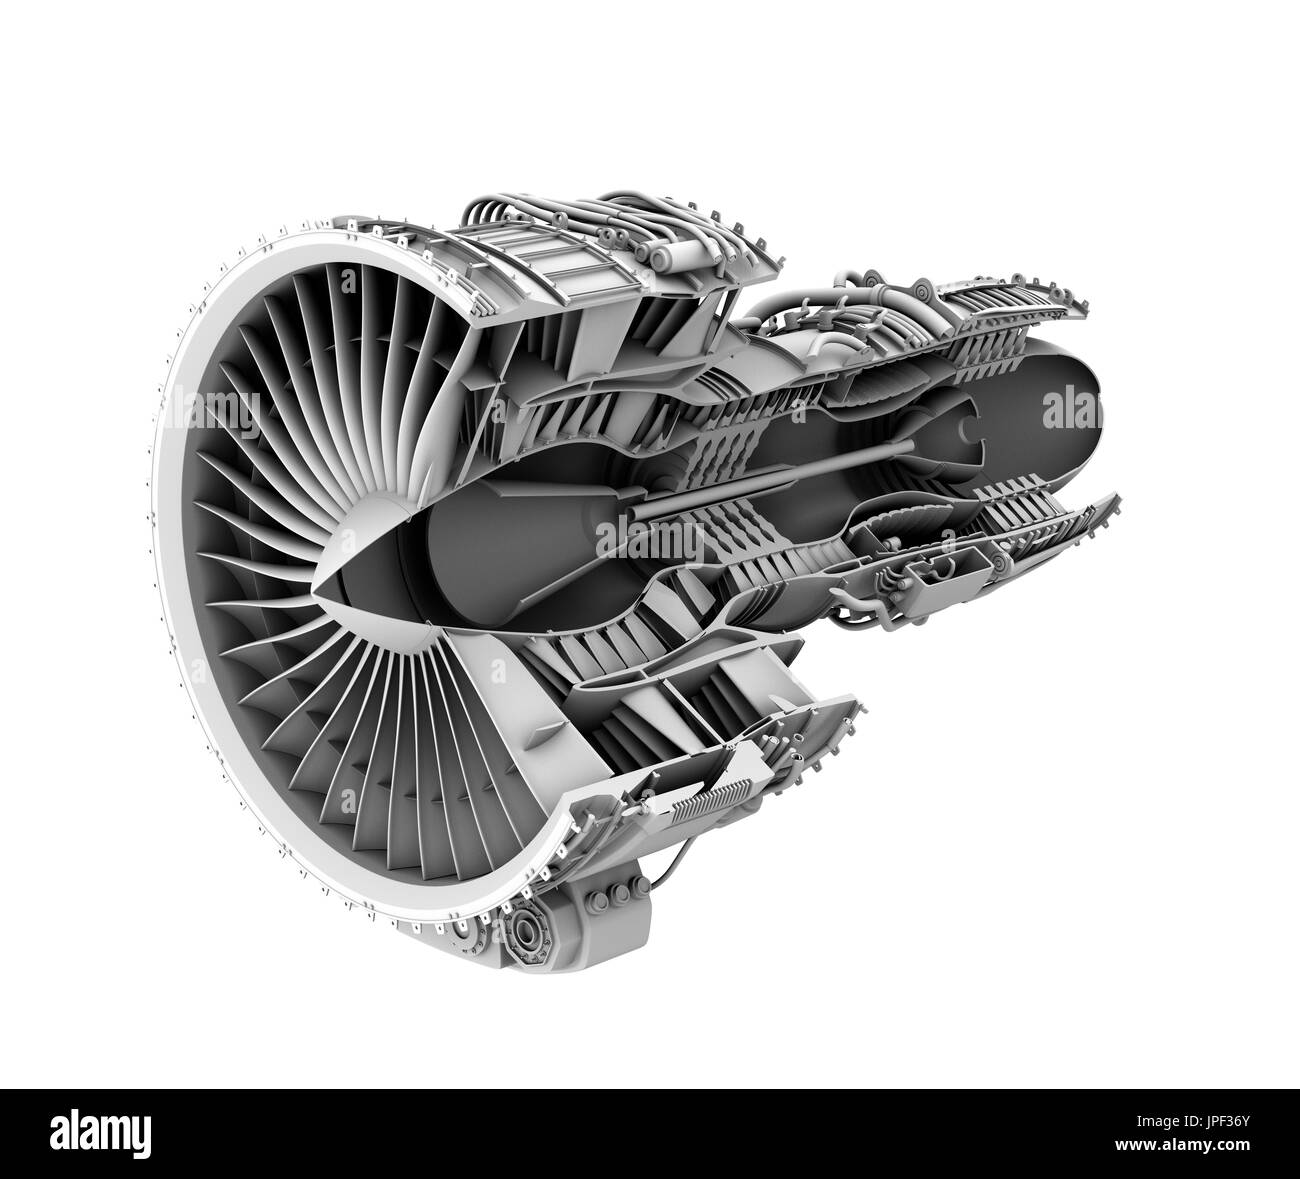 3D clay cutaway render of turbofan jet engine isolated on white background. 3D rendering image. Stock Photo